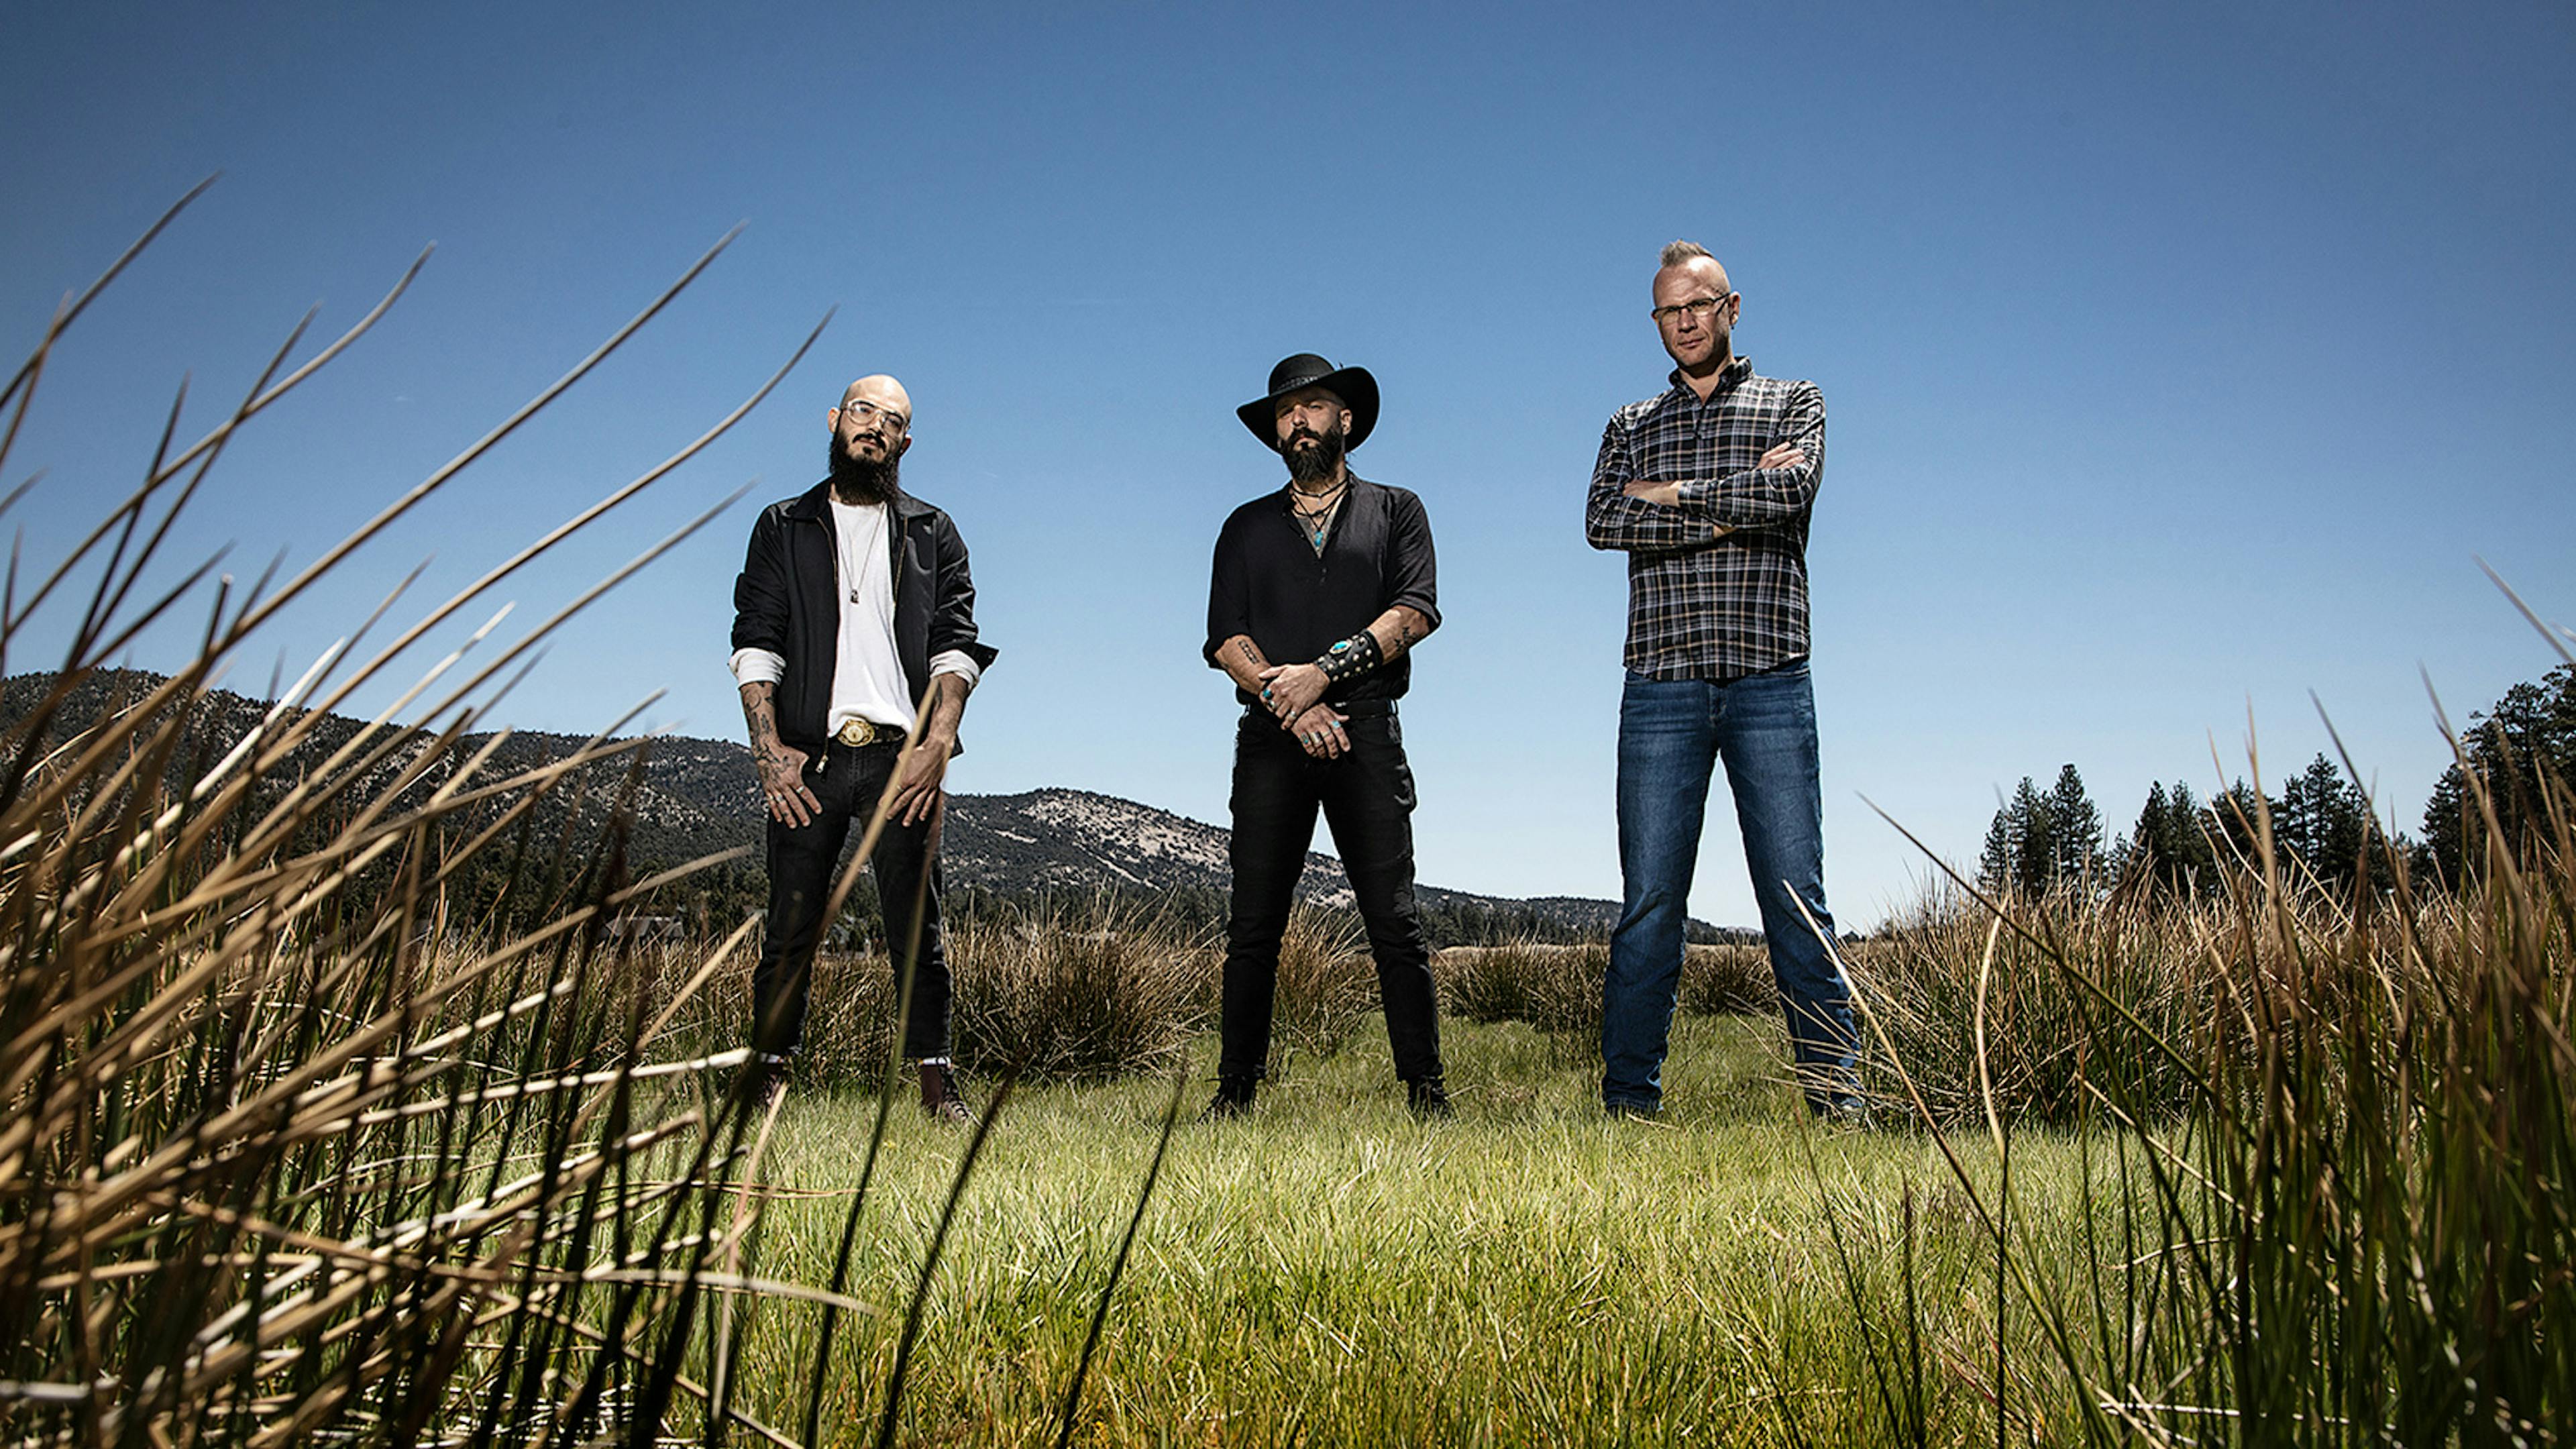 Times Of Grace (feat. Killswitch Engage members) return from 10-year hiatus